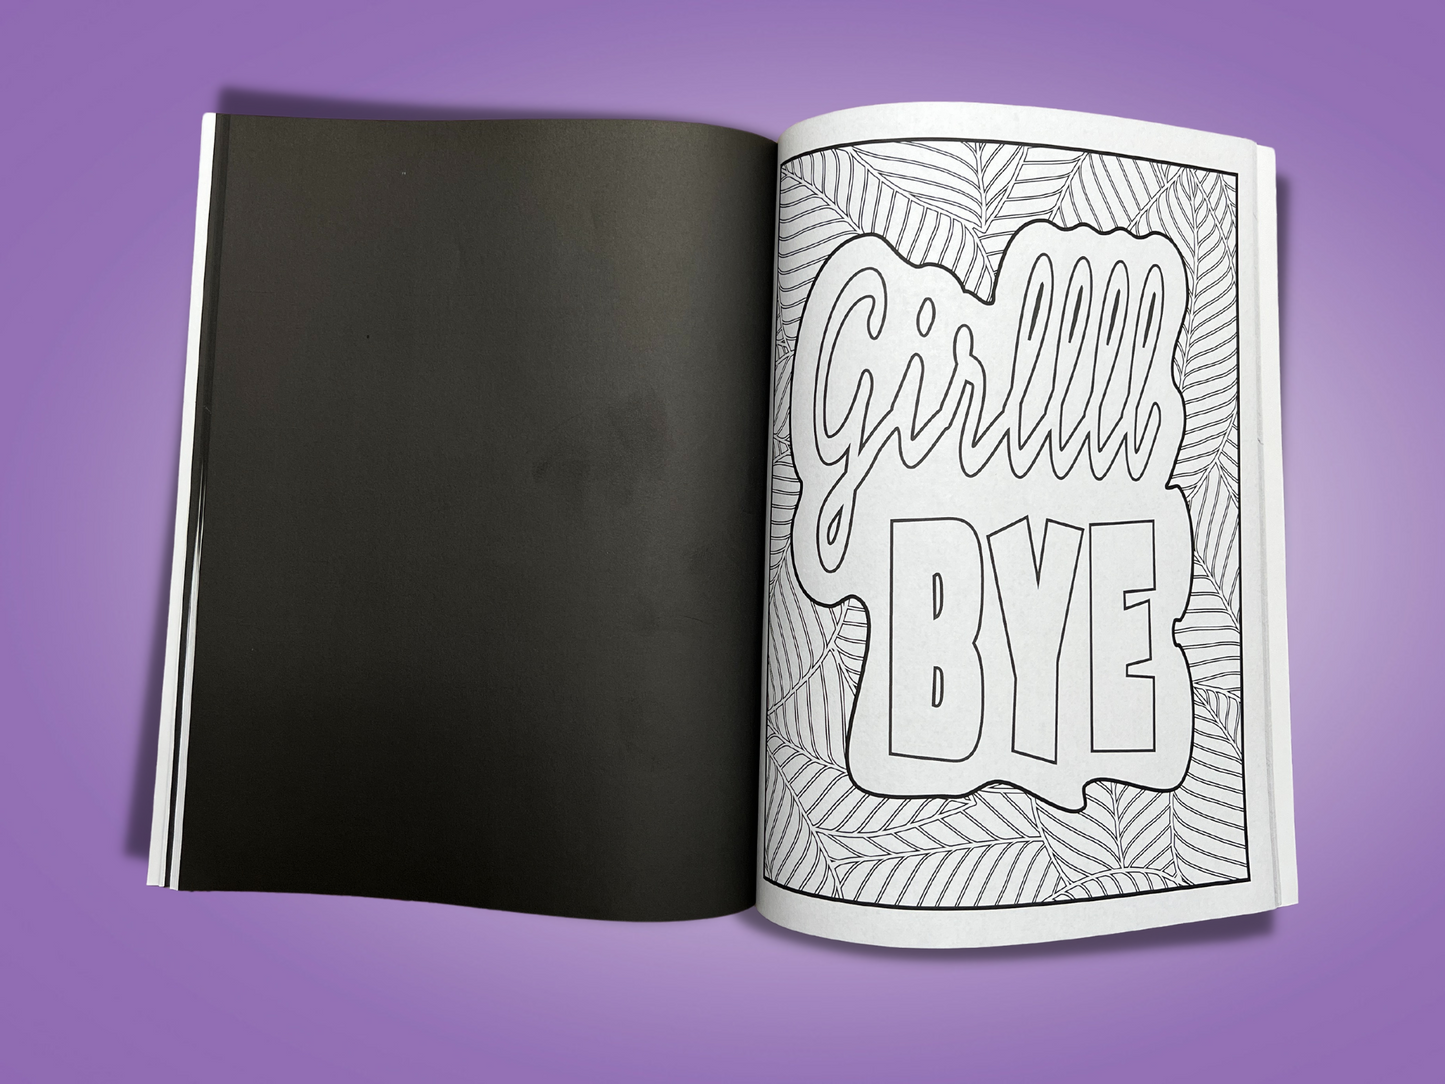 A Whole Mood: An Adult Coloring Book with Phrases from the Culture